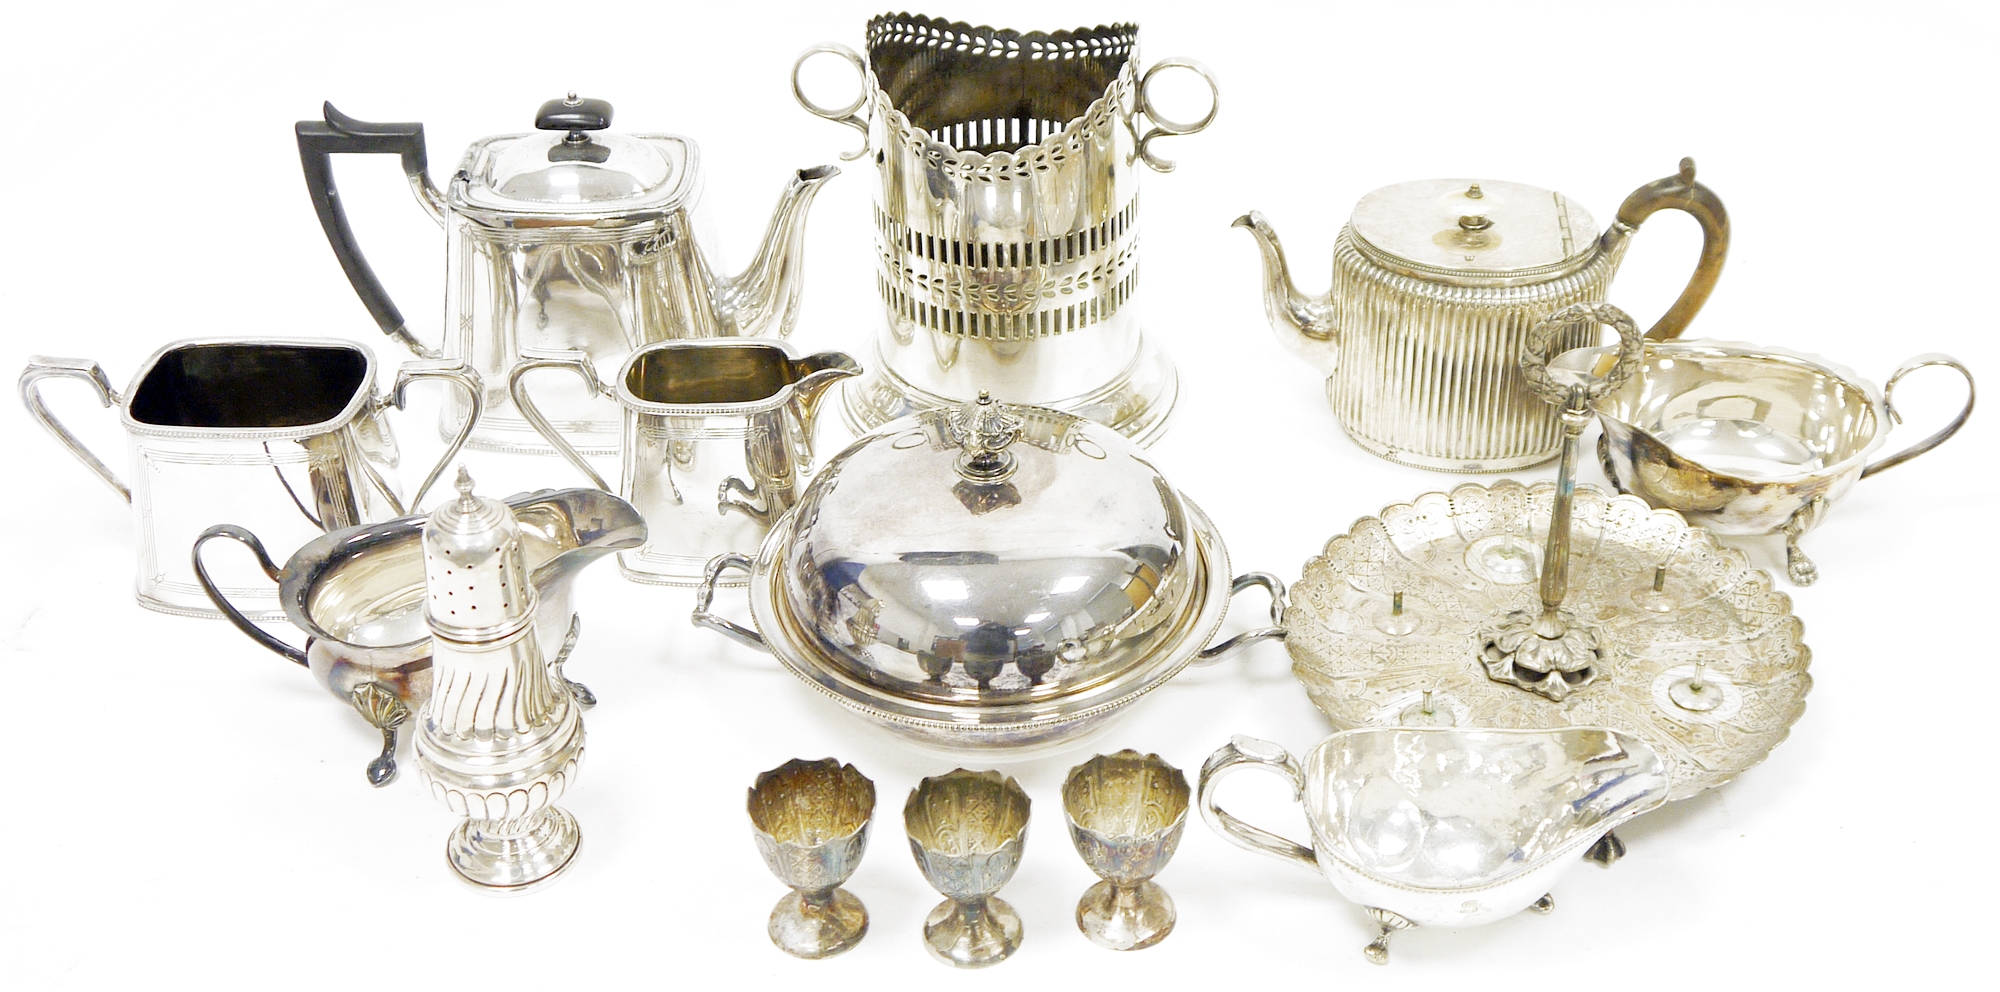 Collection of plated ware, including a three piece tea set; cream and milk jugs; entree dish and